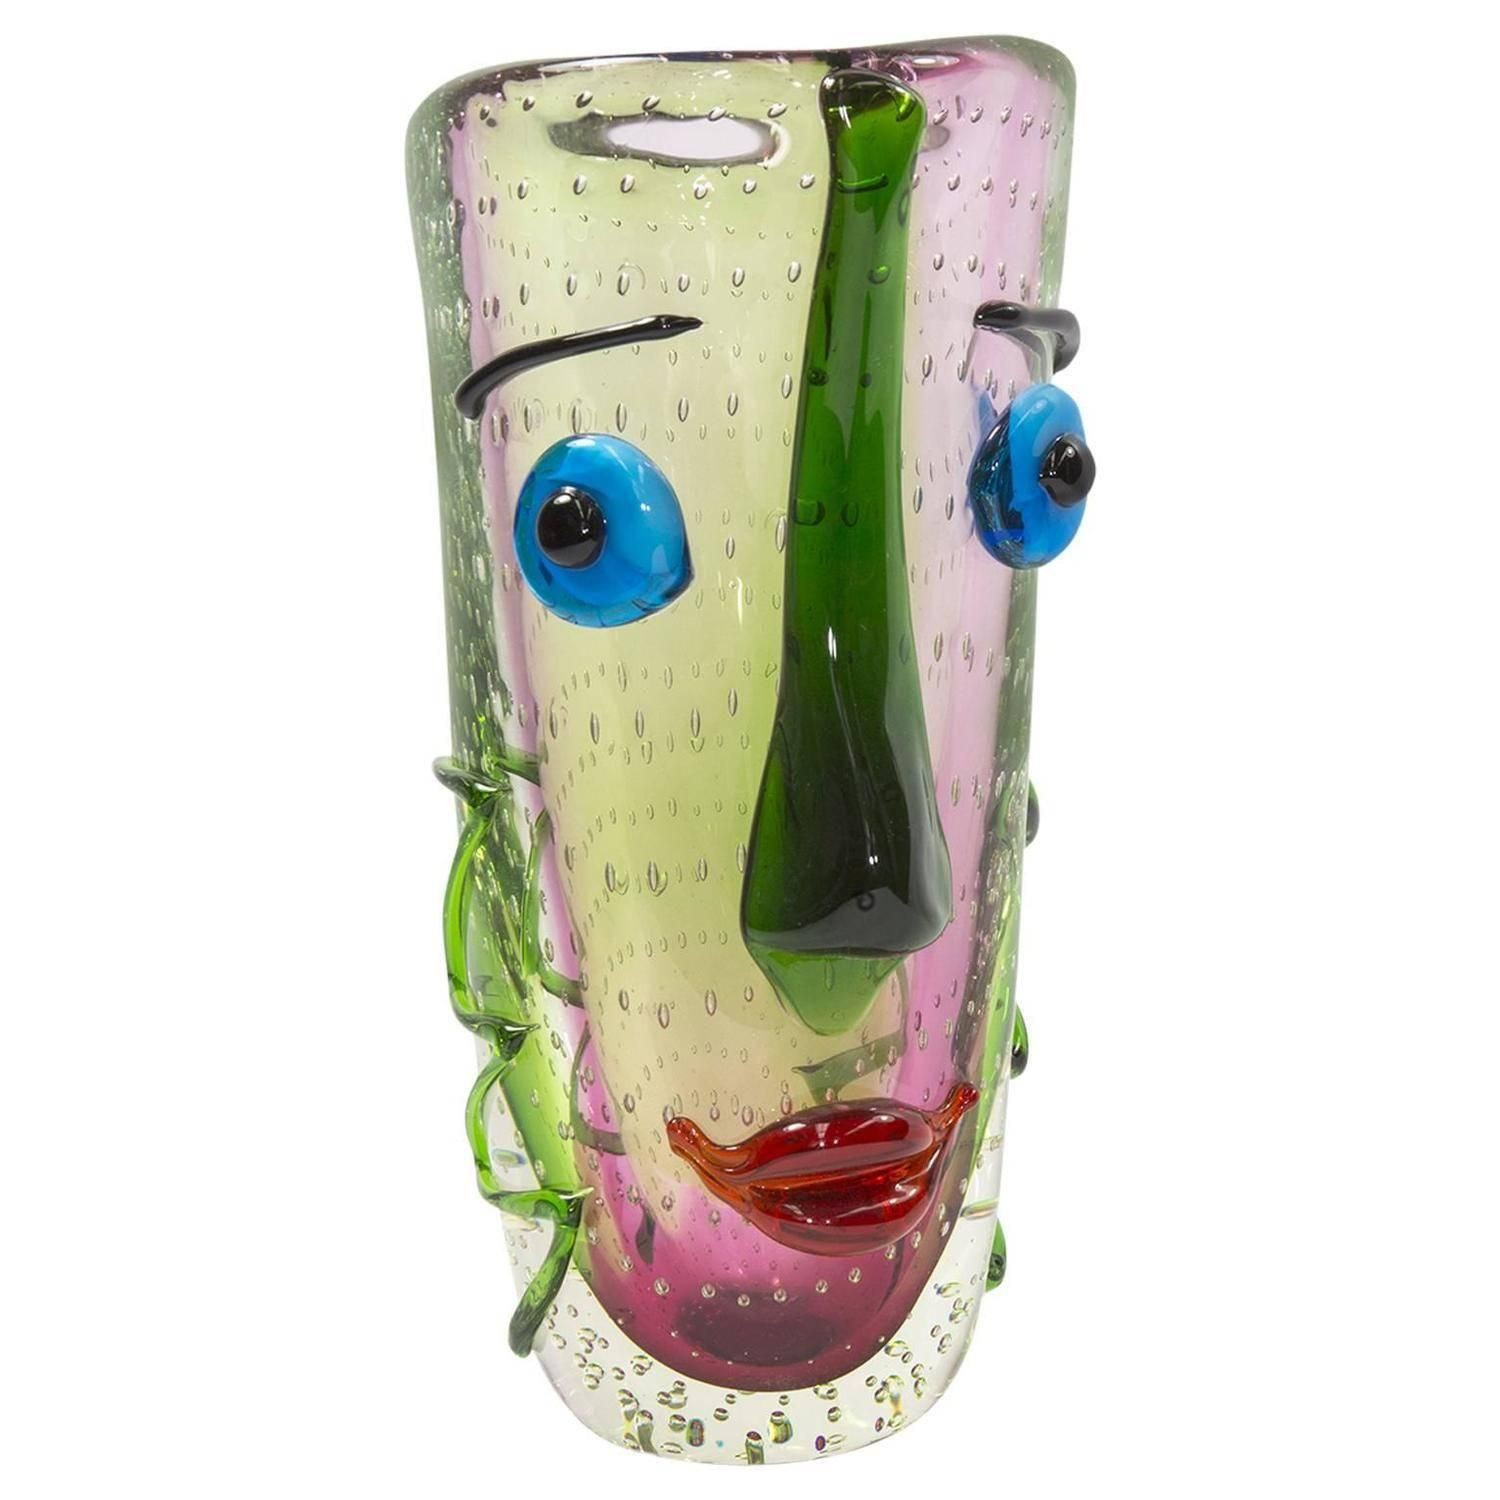 13 Best Square Glass Vases for Sale 2024 free download square glass vases for sale of fabulous large murano multicolored abstract picasso face art glass for fabulous large murano multicolored abstract picasso face art glass vase